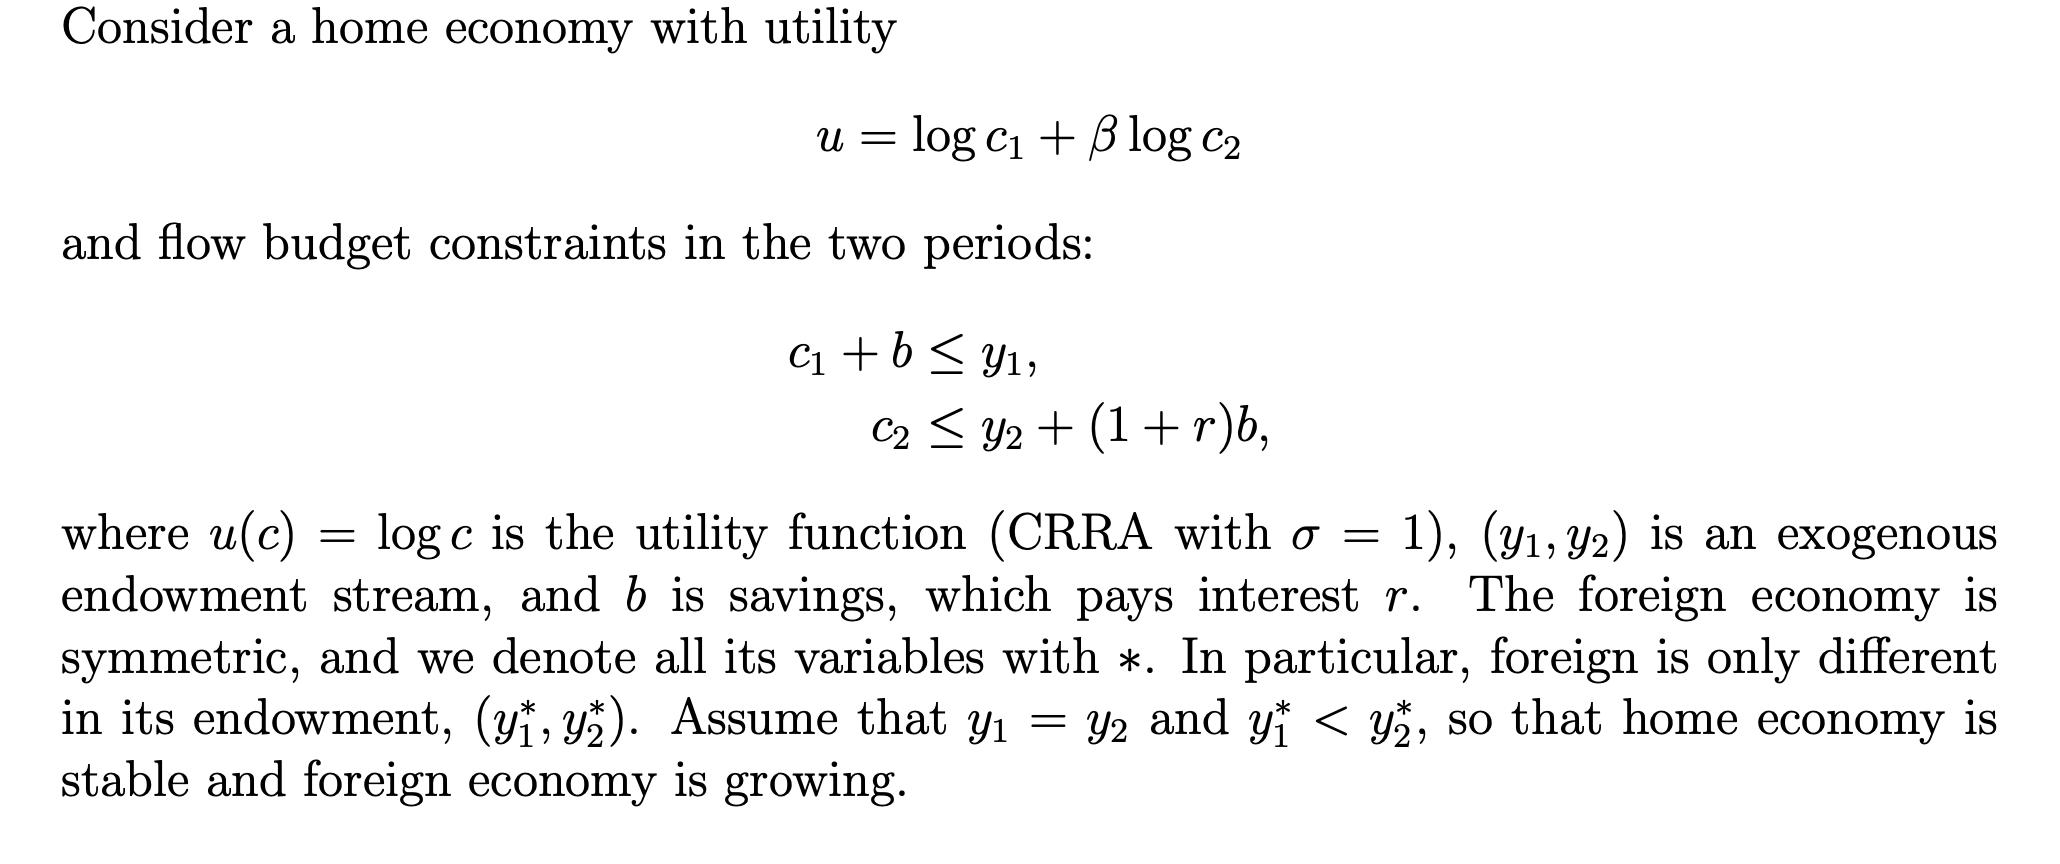 Consider a home economy with utility u = log C1 + B log C2 and flow budget constraints in the two periods: C1 + b < y1, C2 <